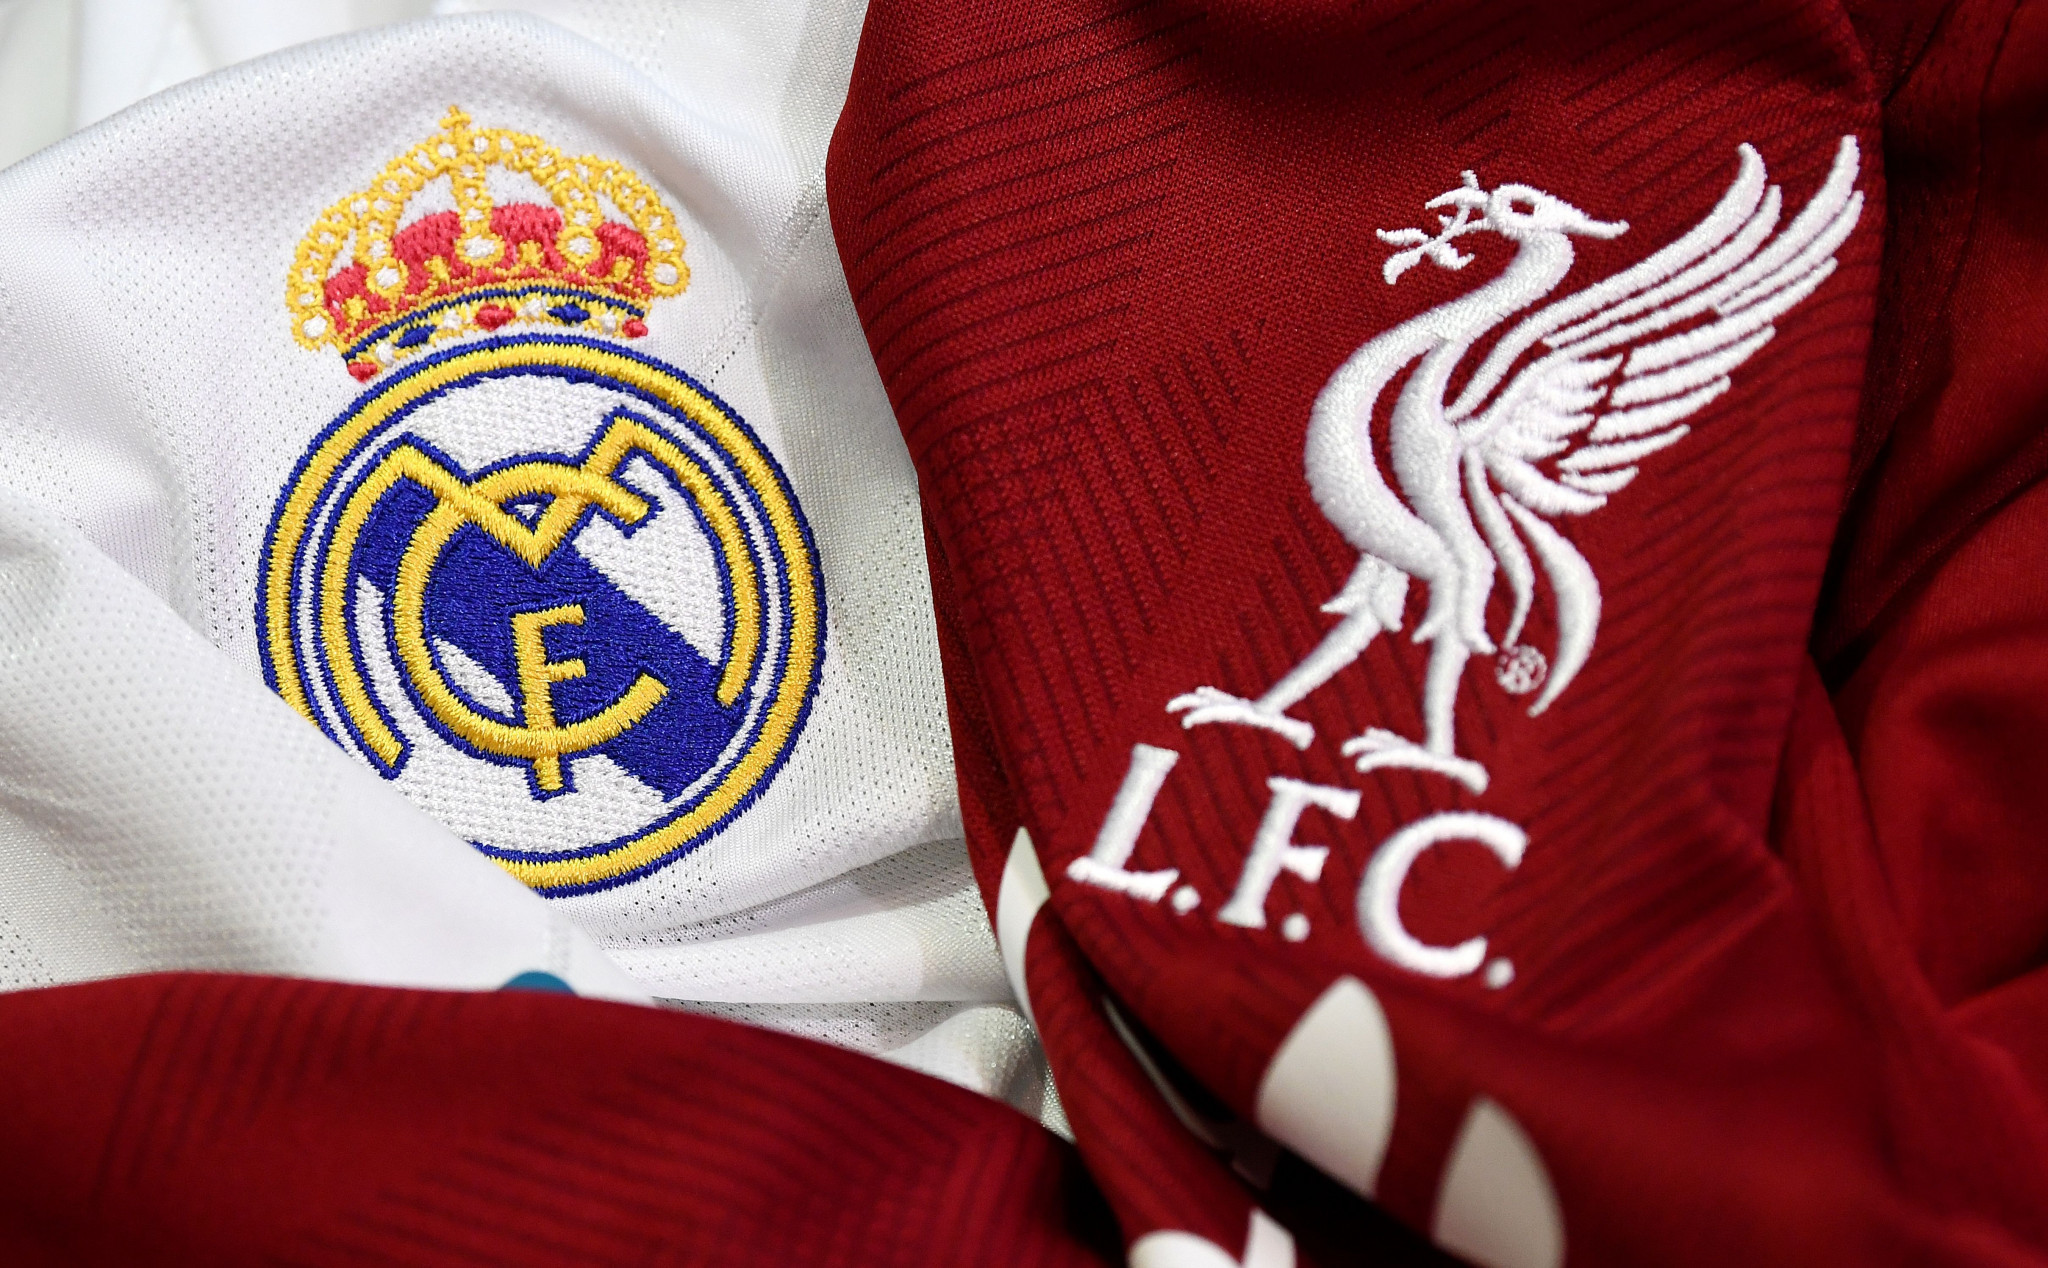 Clubs including Real Madrid and Liverpool have angered UEFA by signing up for The Super League ©Getty Images